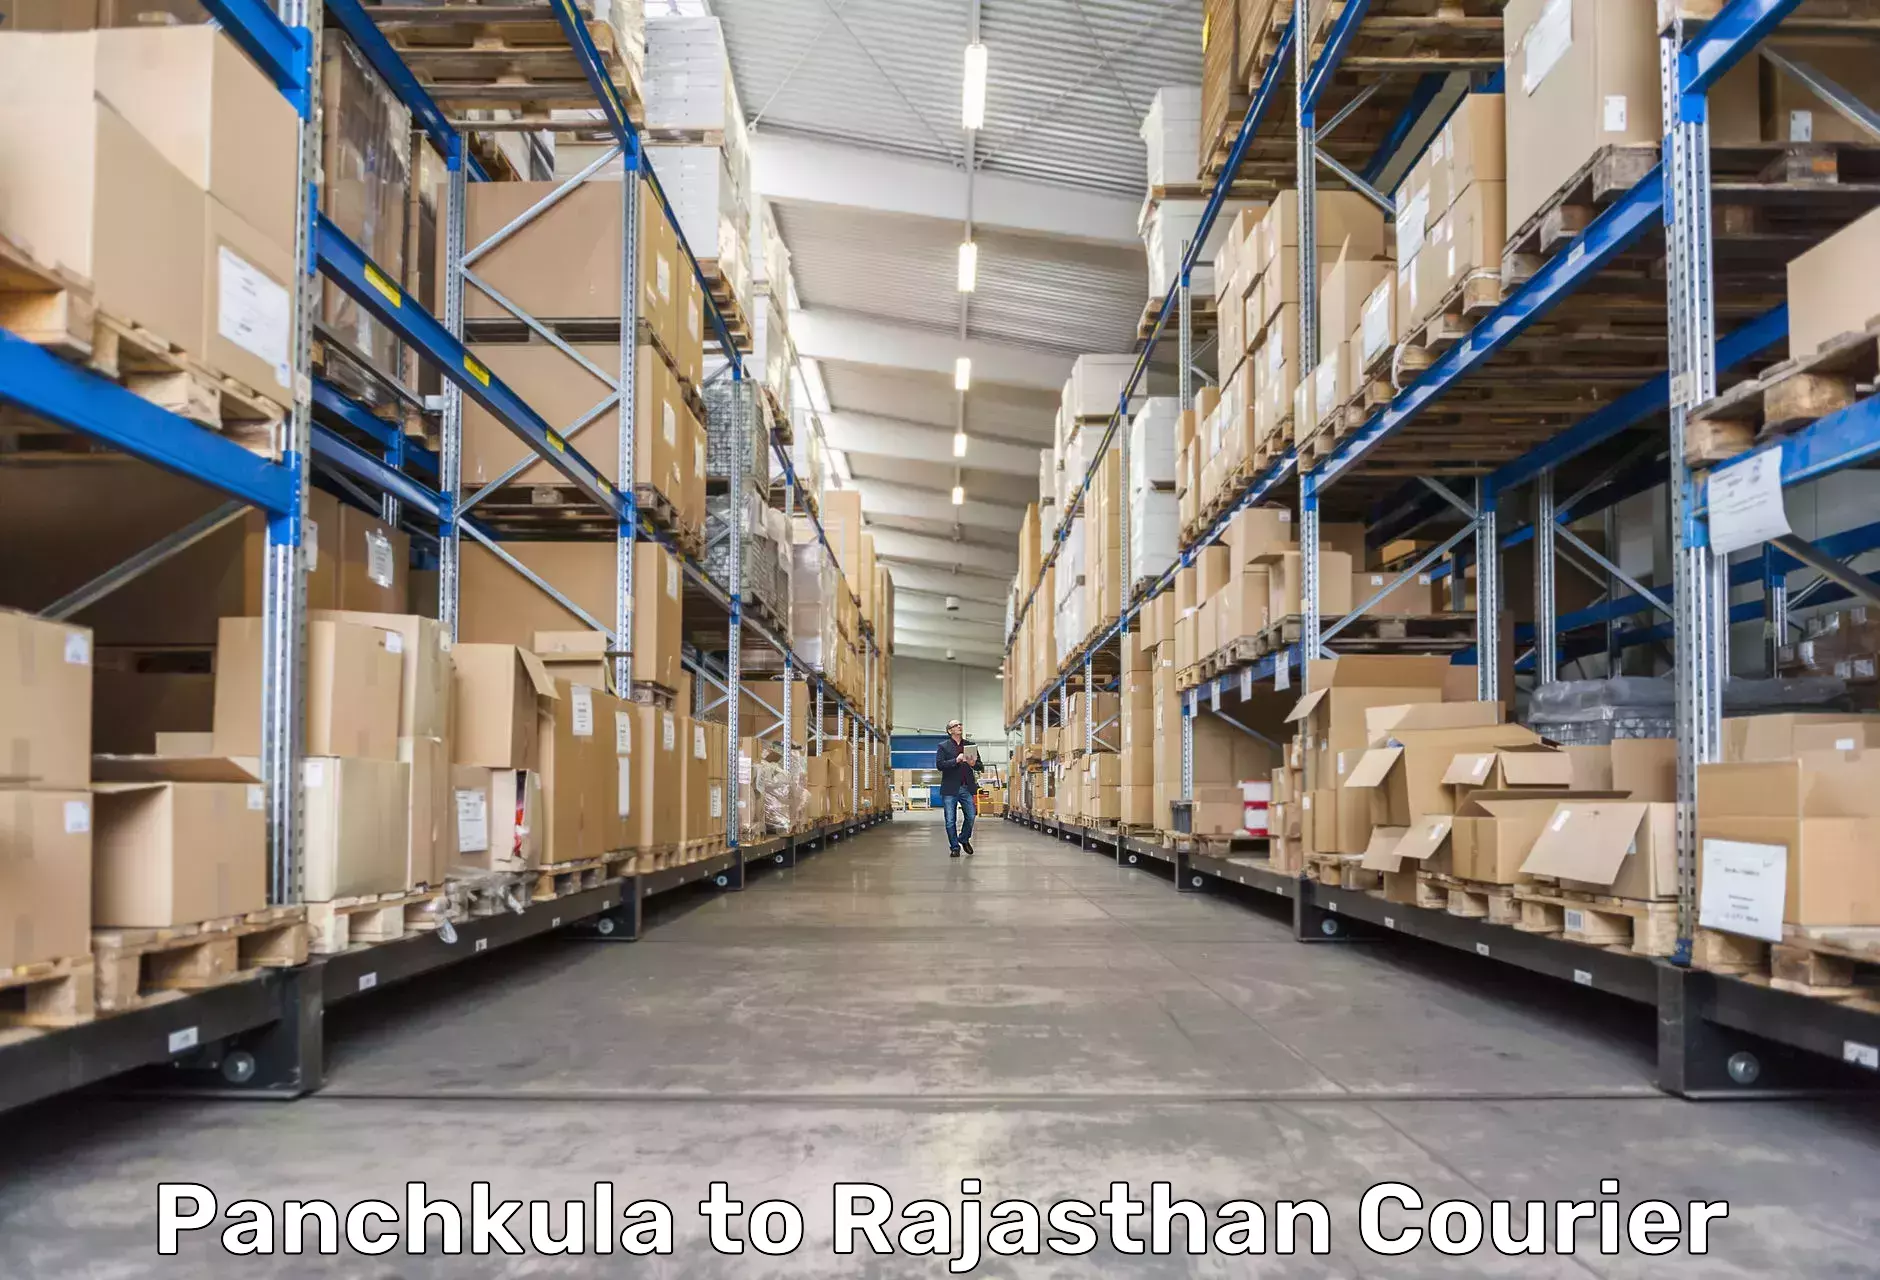 Subscription-based courier Panchkula to Rajasthan